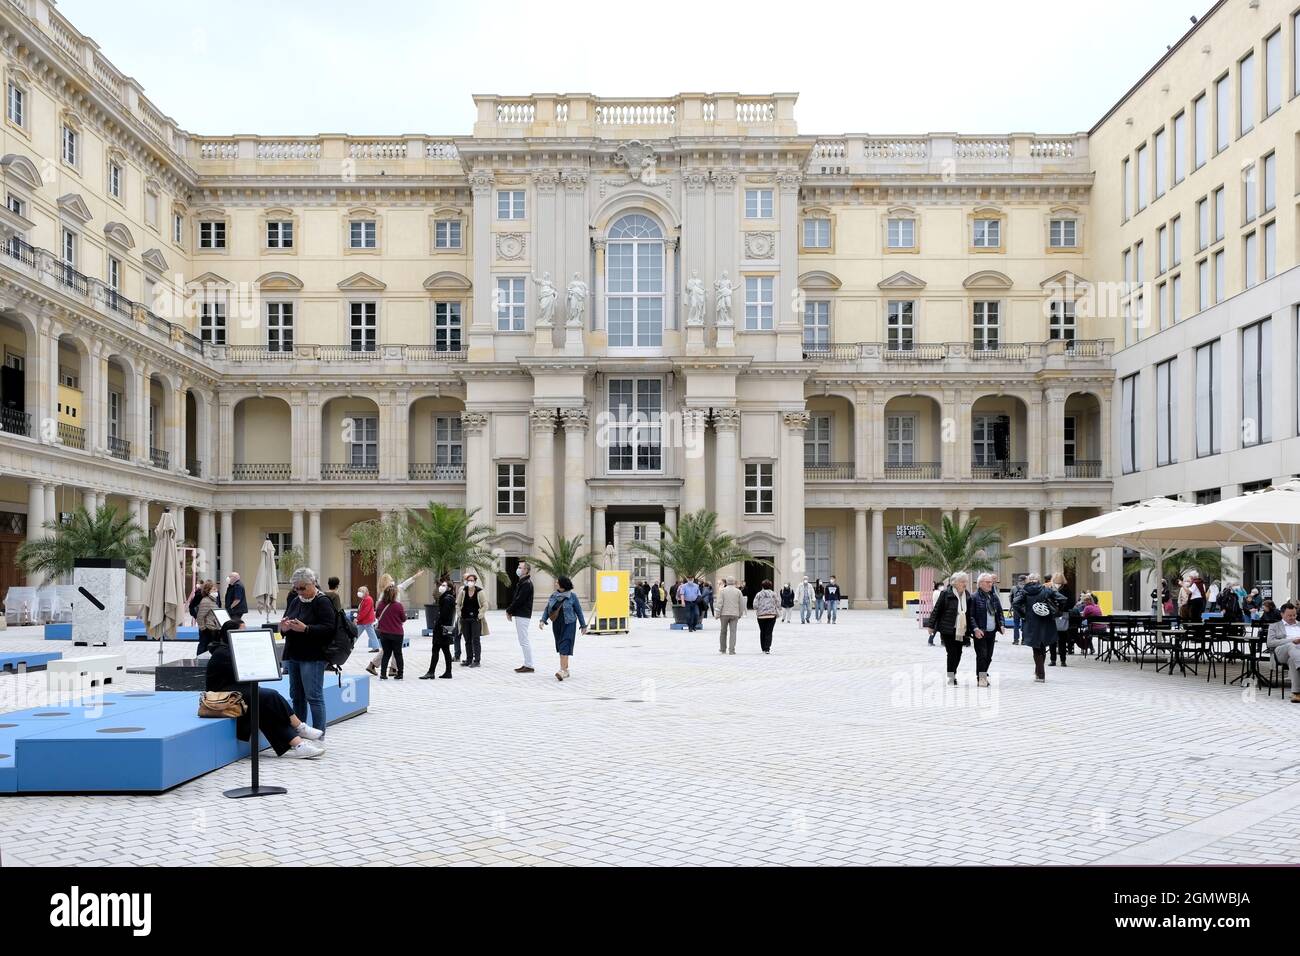 Berlin, Germany, September 17, 2021, large courtyard of the restored Berlin Palace with Humboldt Forum Stock Photo